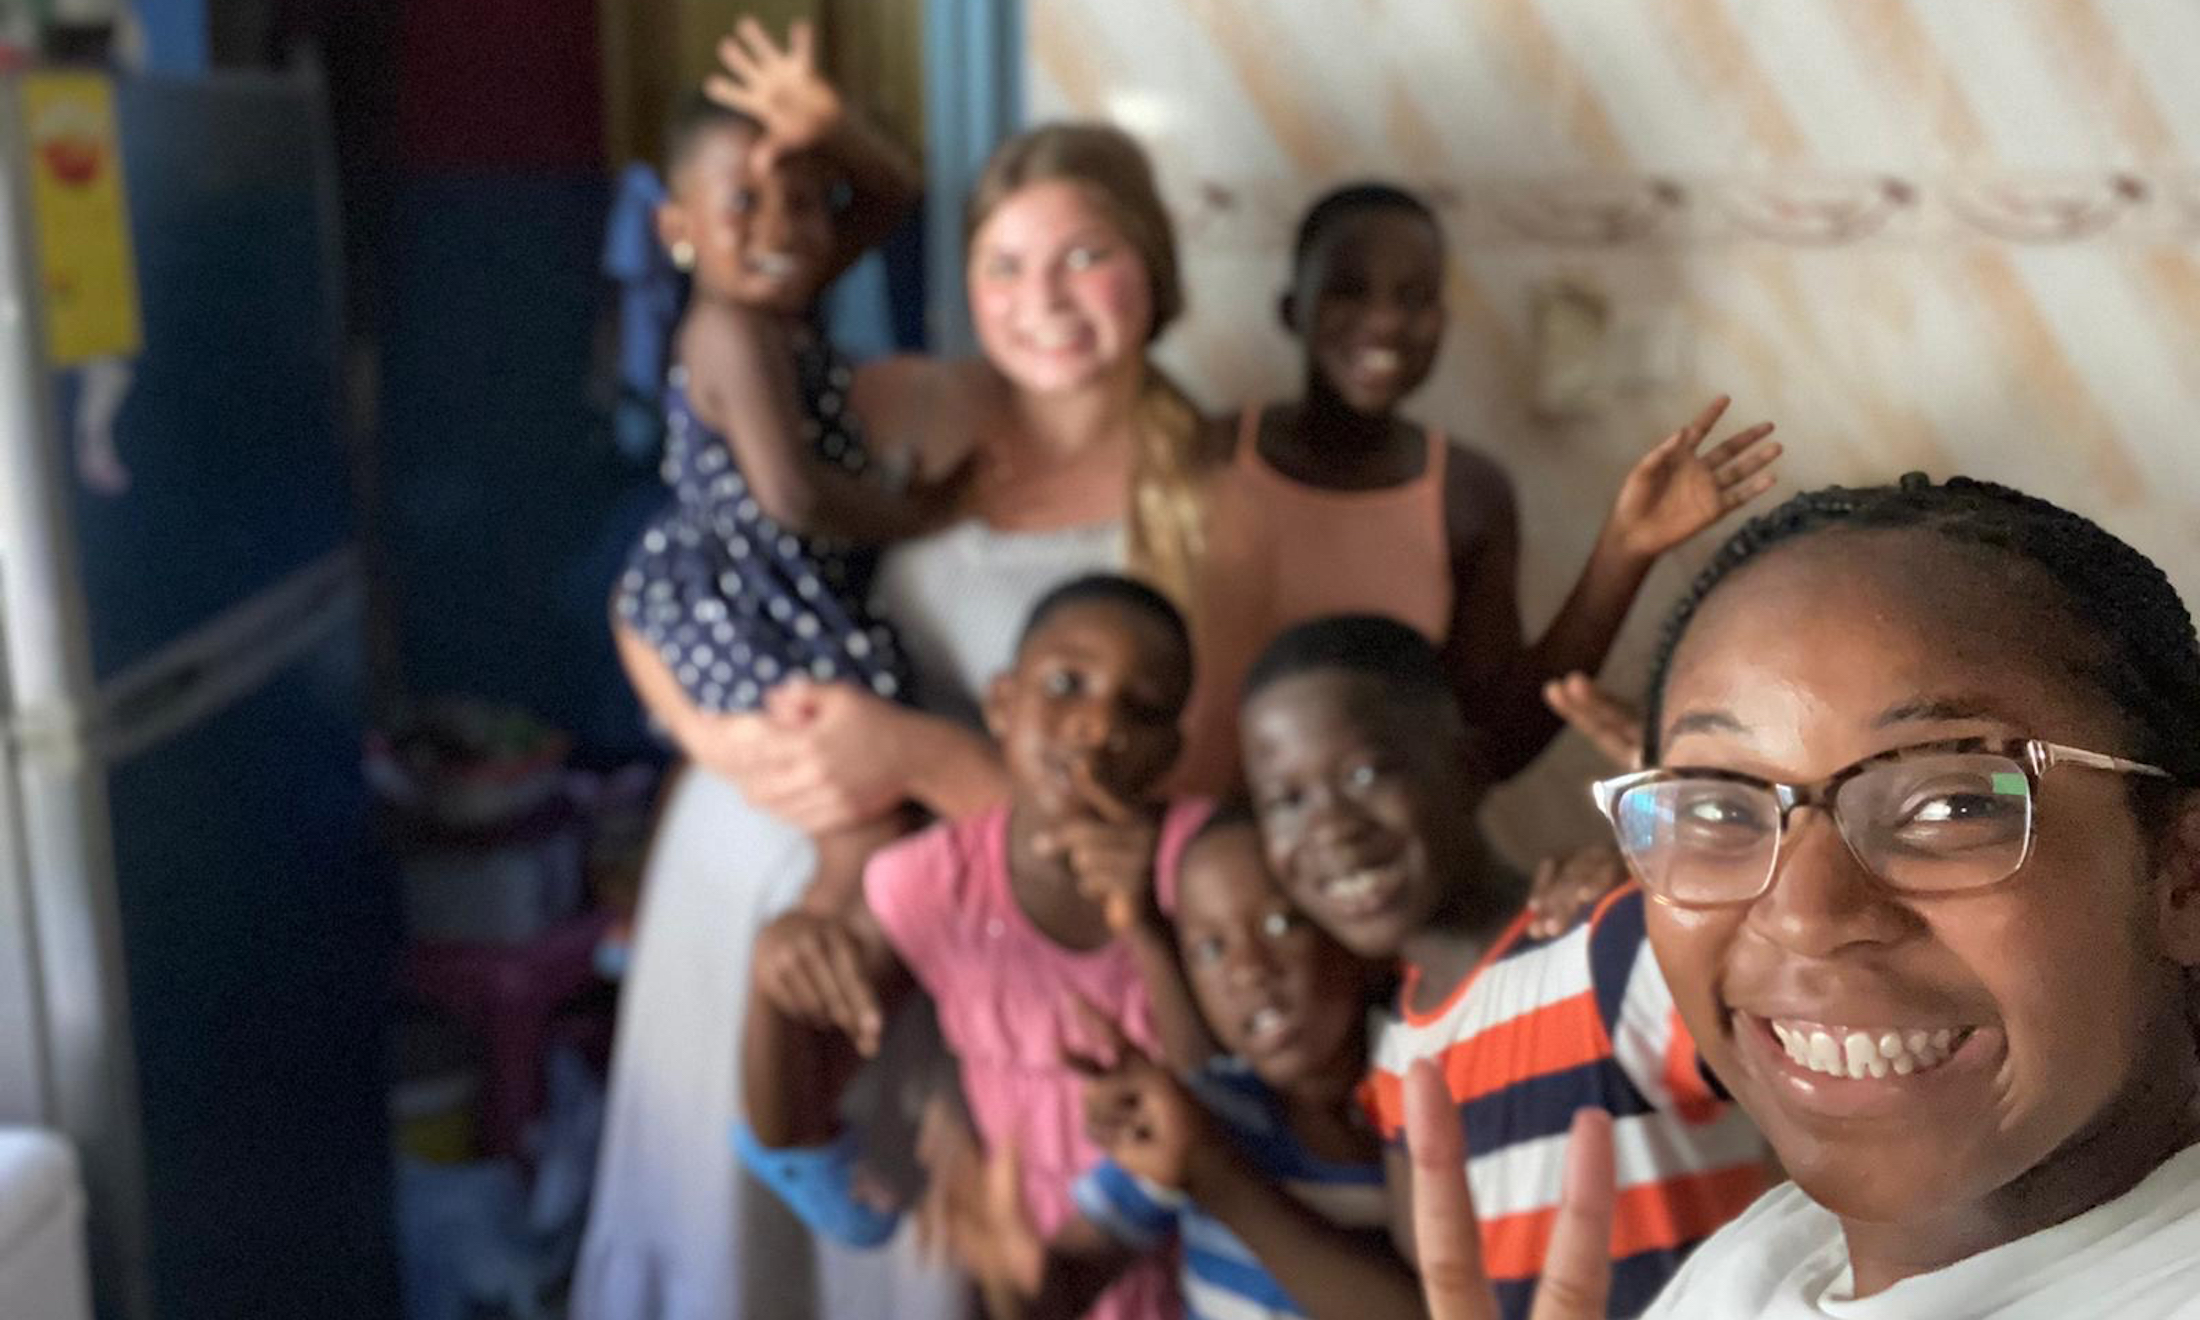 OU students take a selfie with children in Ghana